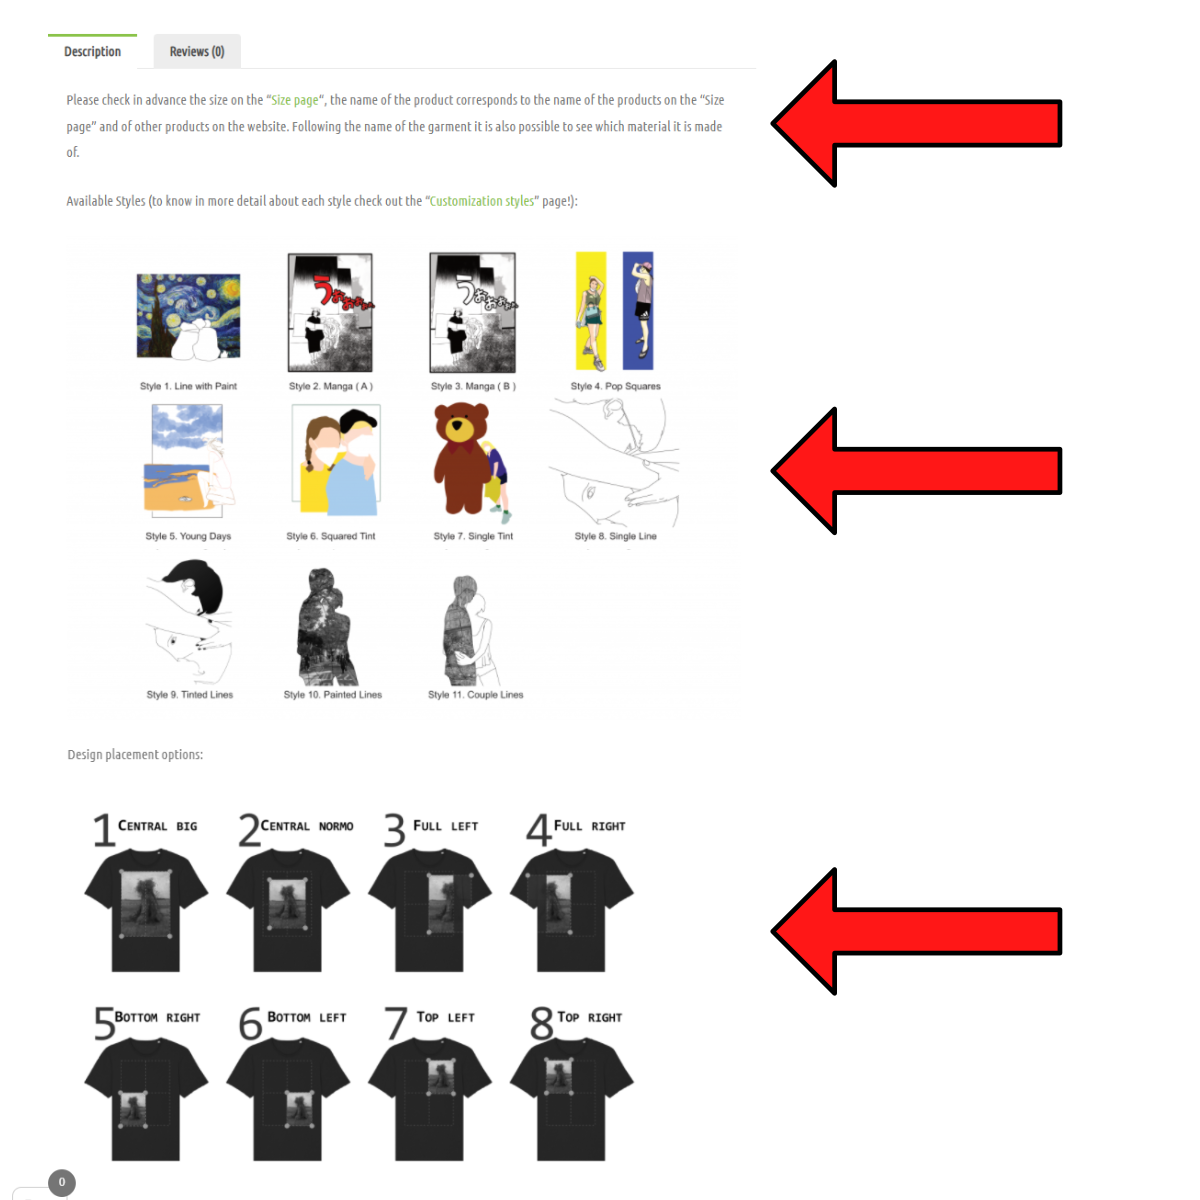 NITEMUS - Customization information - Step n. 4 - Check the product details